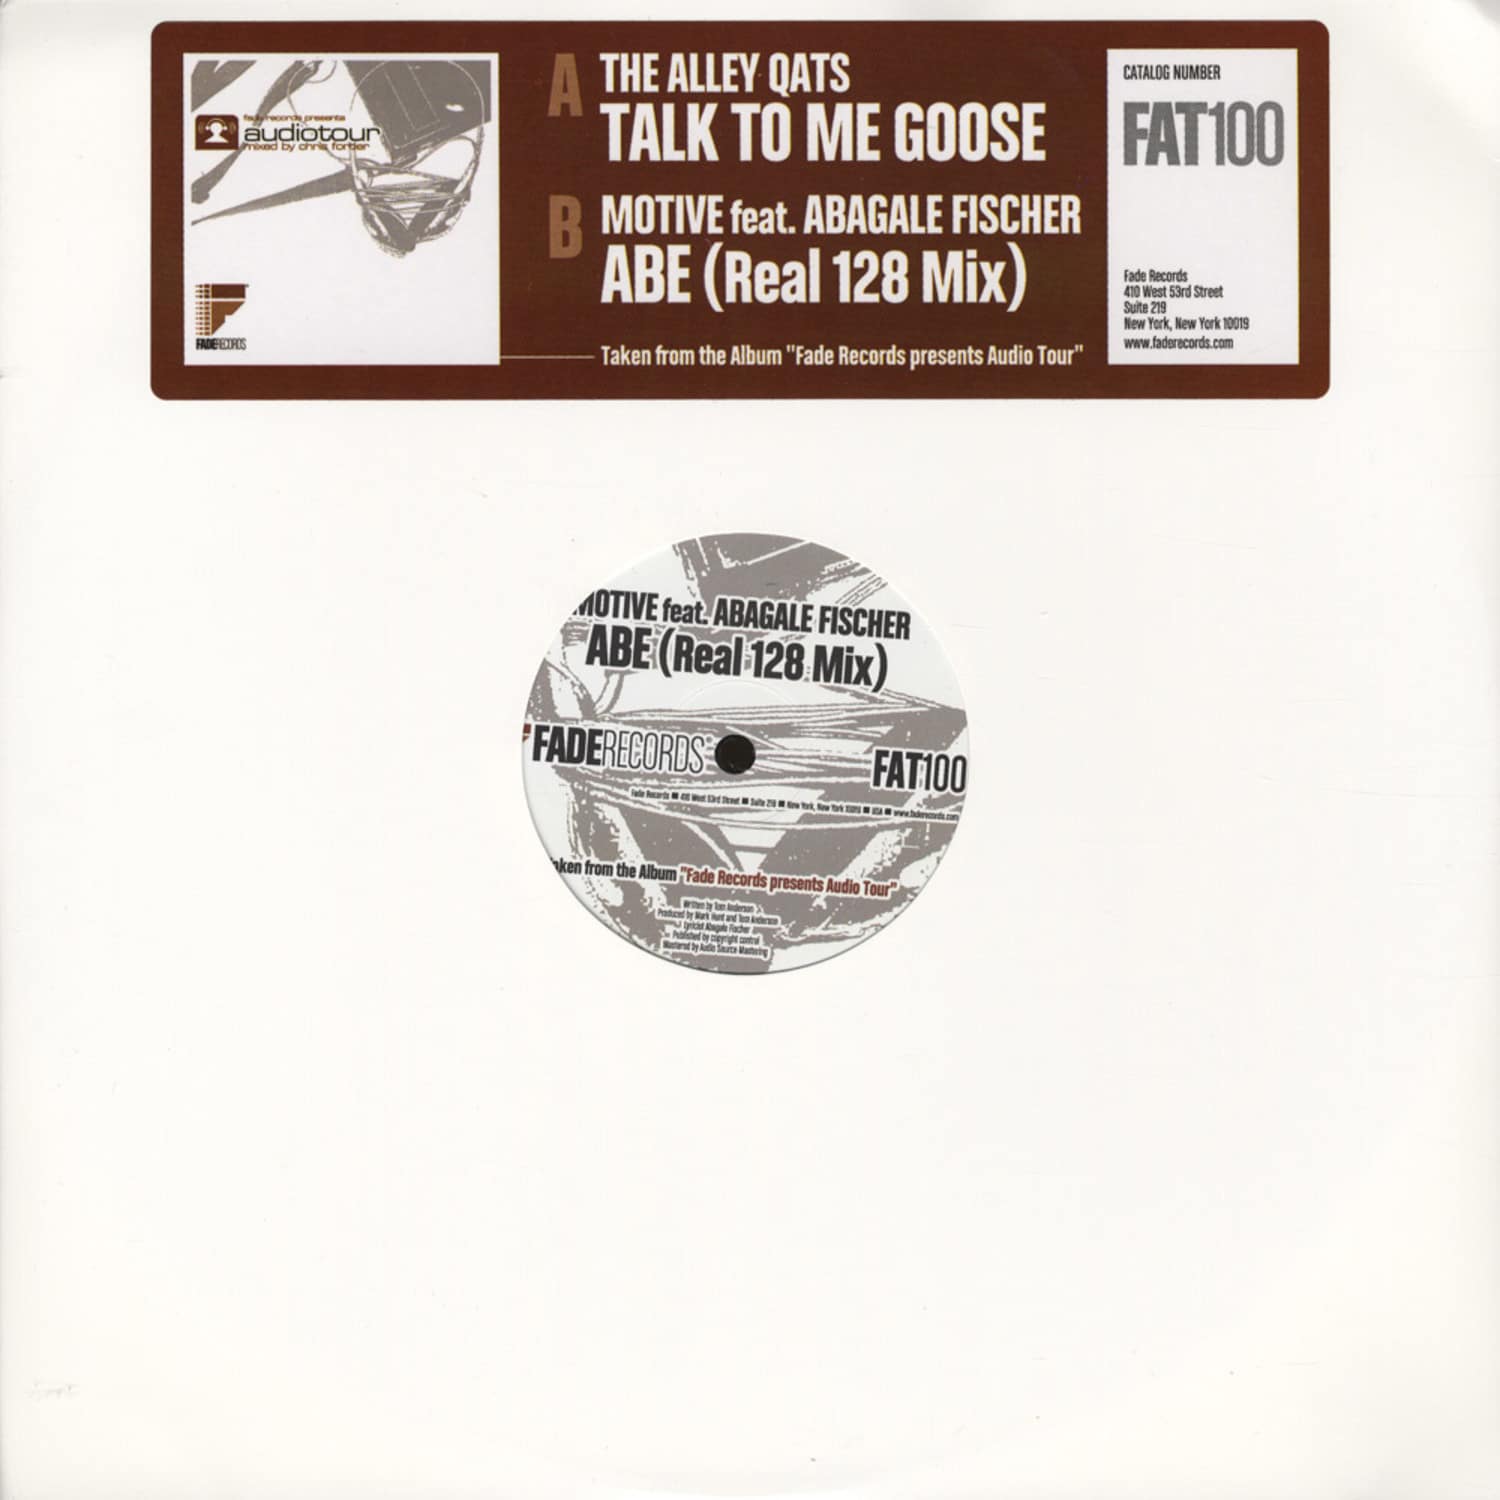 Alley Qats - talk to me goose